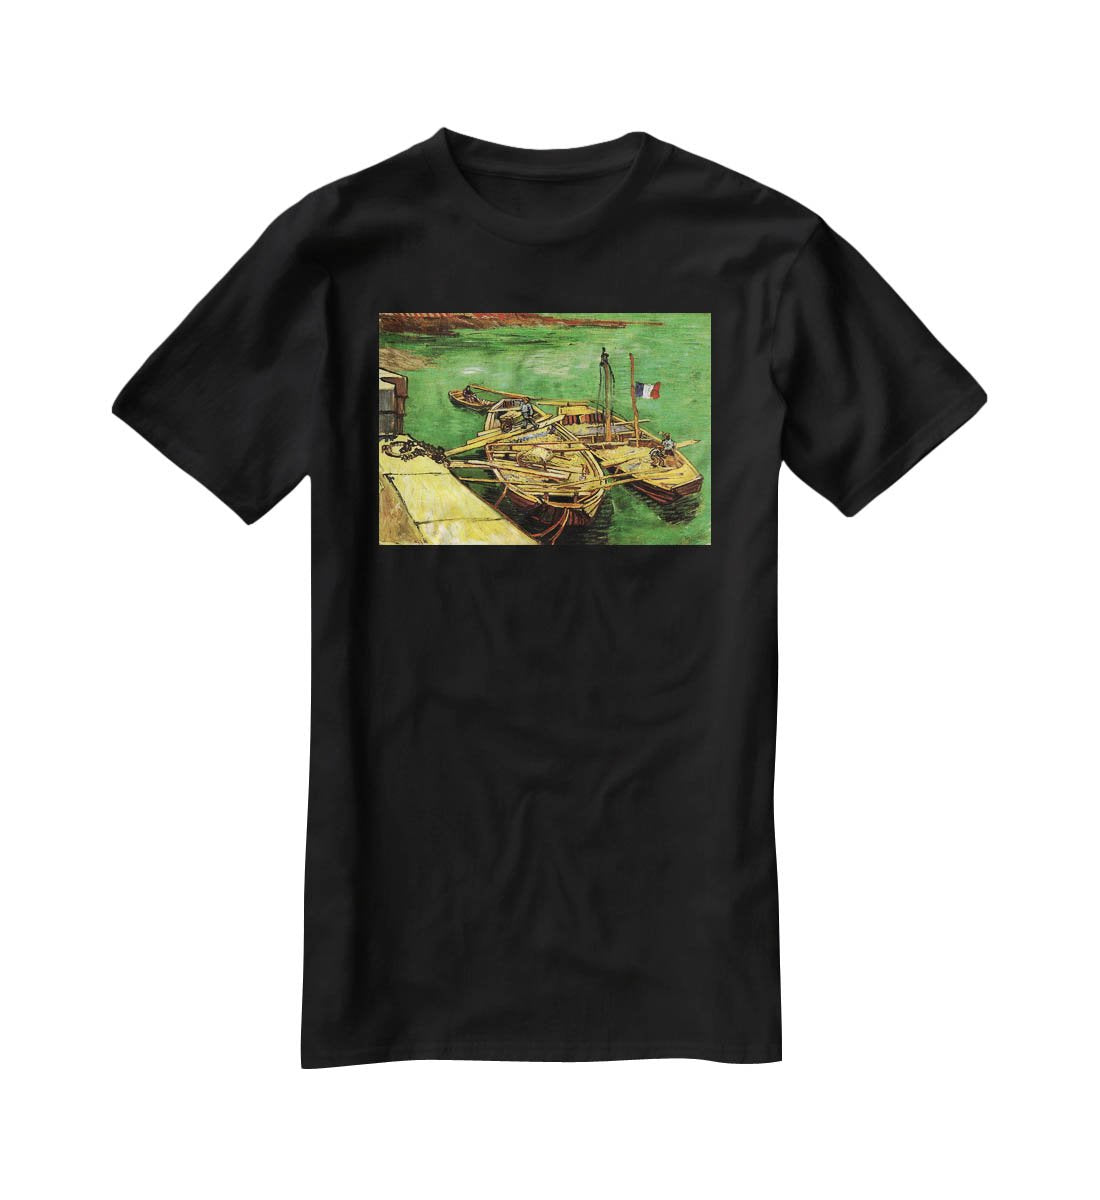 Quay with Men Unloading Sand Barges by Van Gogh T-Shirt - Canvas Art Rocks - 1